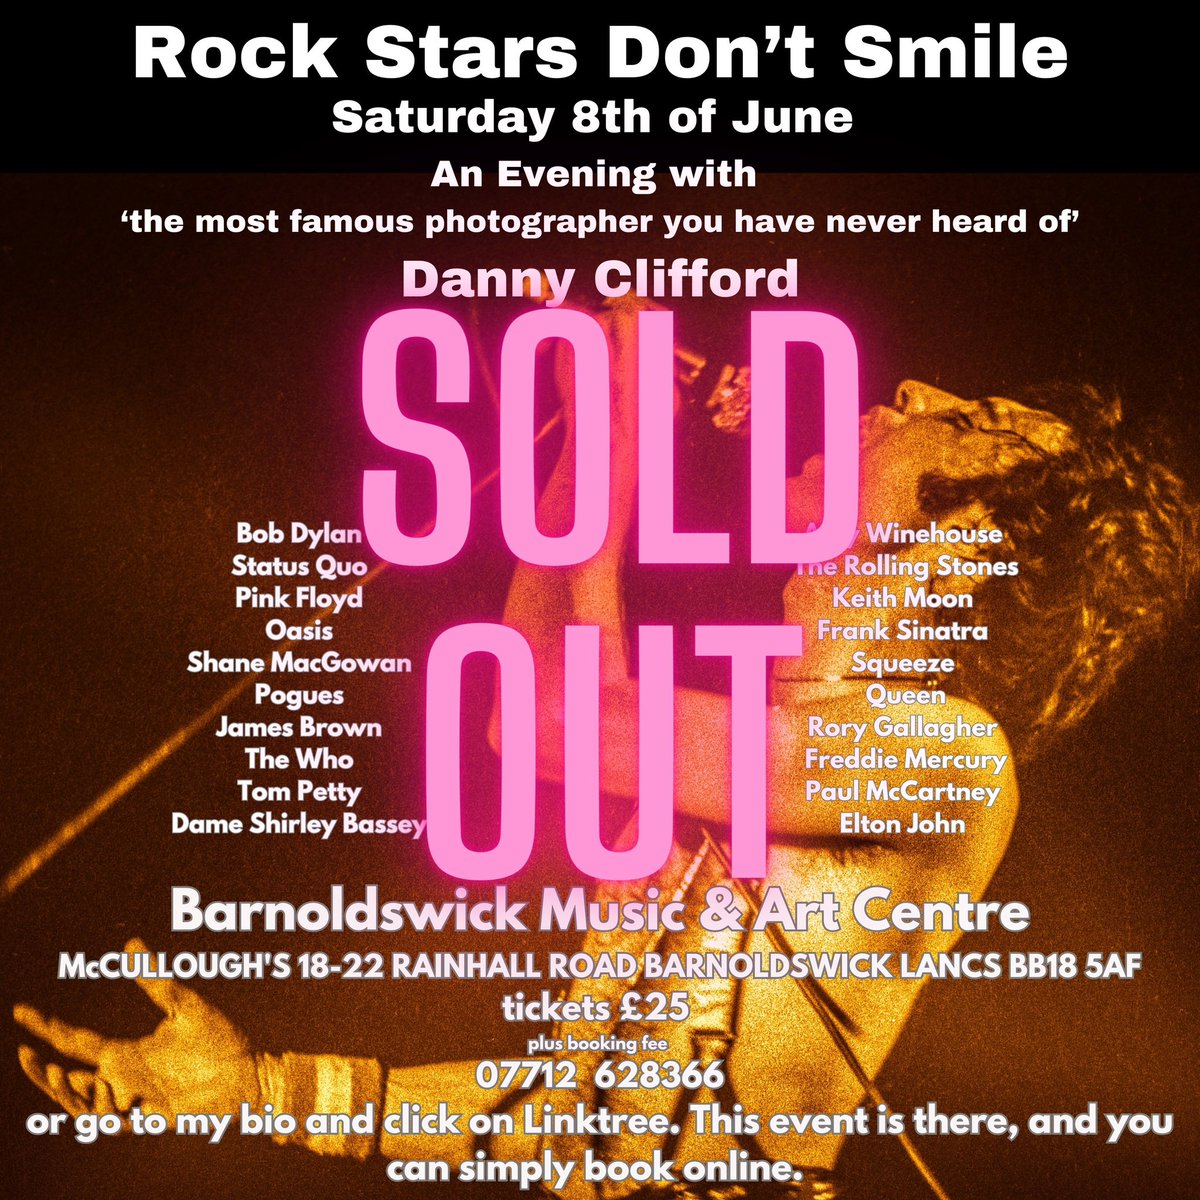 Thanks to all who booked for this event. It is all now sold out. More dates soon. 
#FreddieMercury #Queen #BobDylan #TheWho #Photography #Barnoldswick #Lancashire #Music #Musicphotography #Amywinehouse #Oasis #Liamgallagher #TheRollingStones #RoryGallagher #ShaneMacGowan #camera